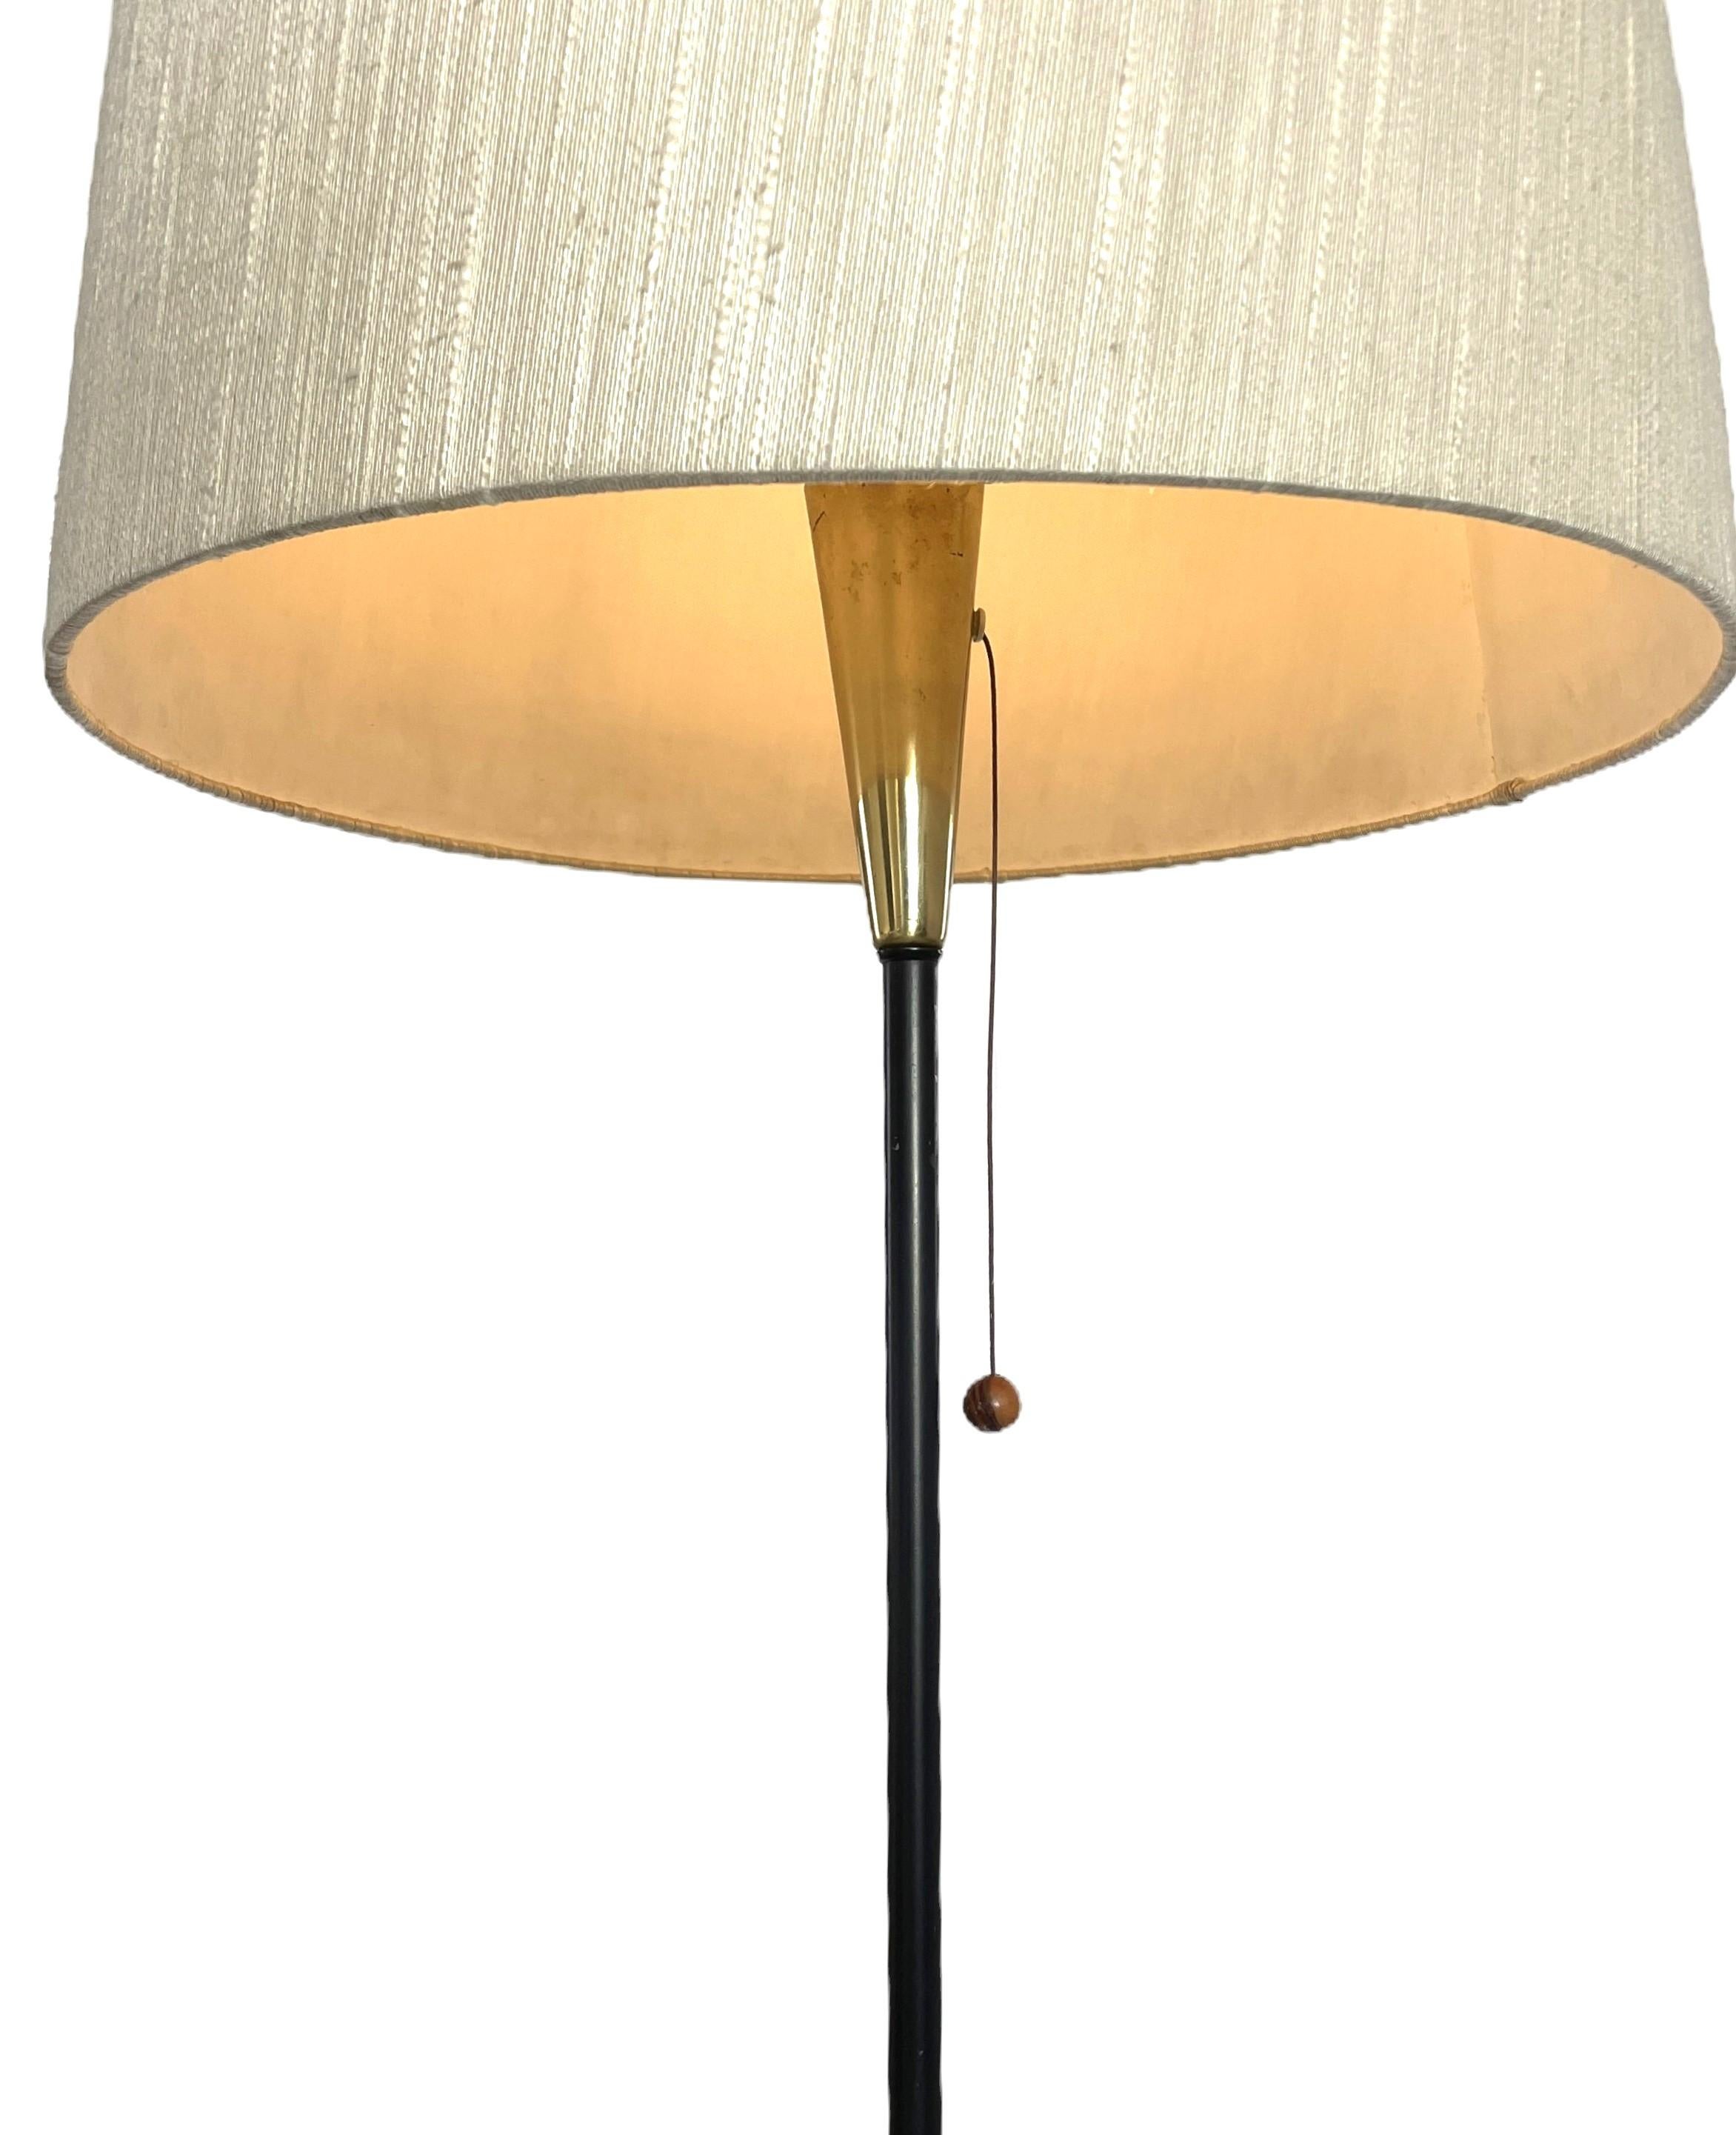 The Floor Lamp designed by Maria Lindeman for Idman in Finland during the 1950s represents Finnish mid-century modern at its best. Lindeman's masterful touch is evident in this piece, where modernity meets luminosity, creating an illuminating